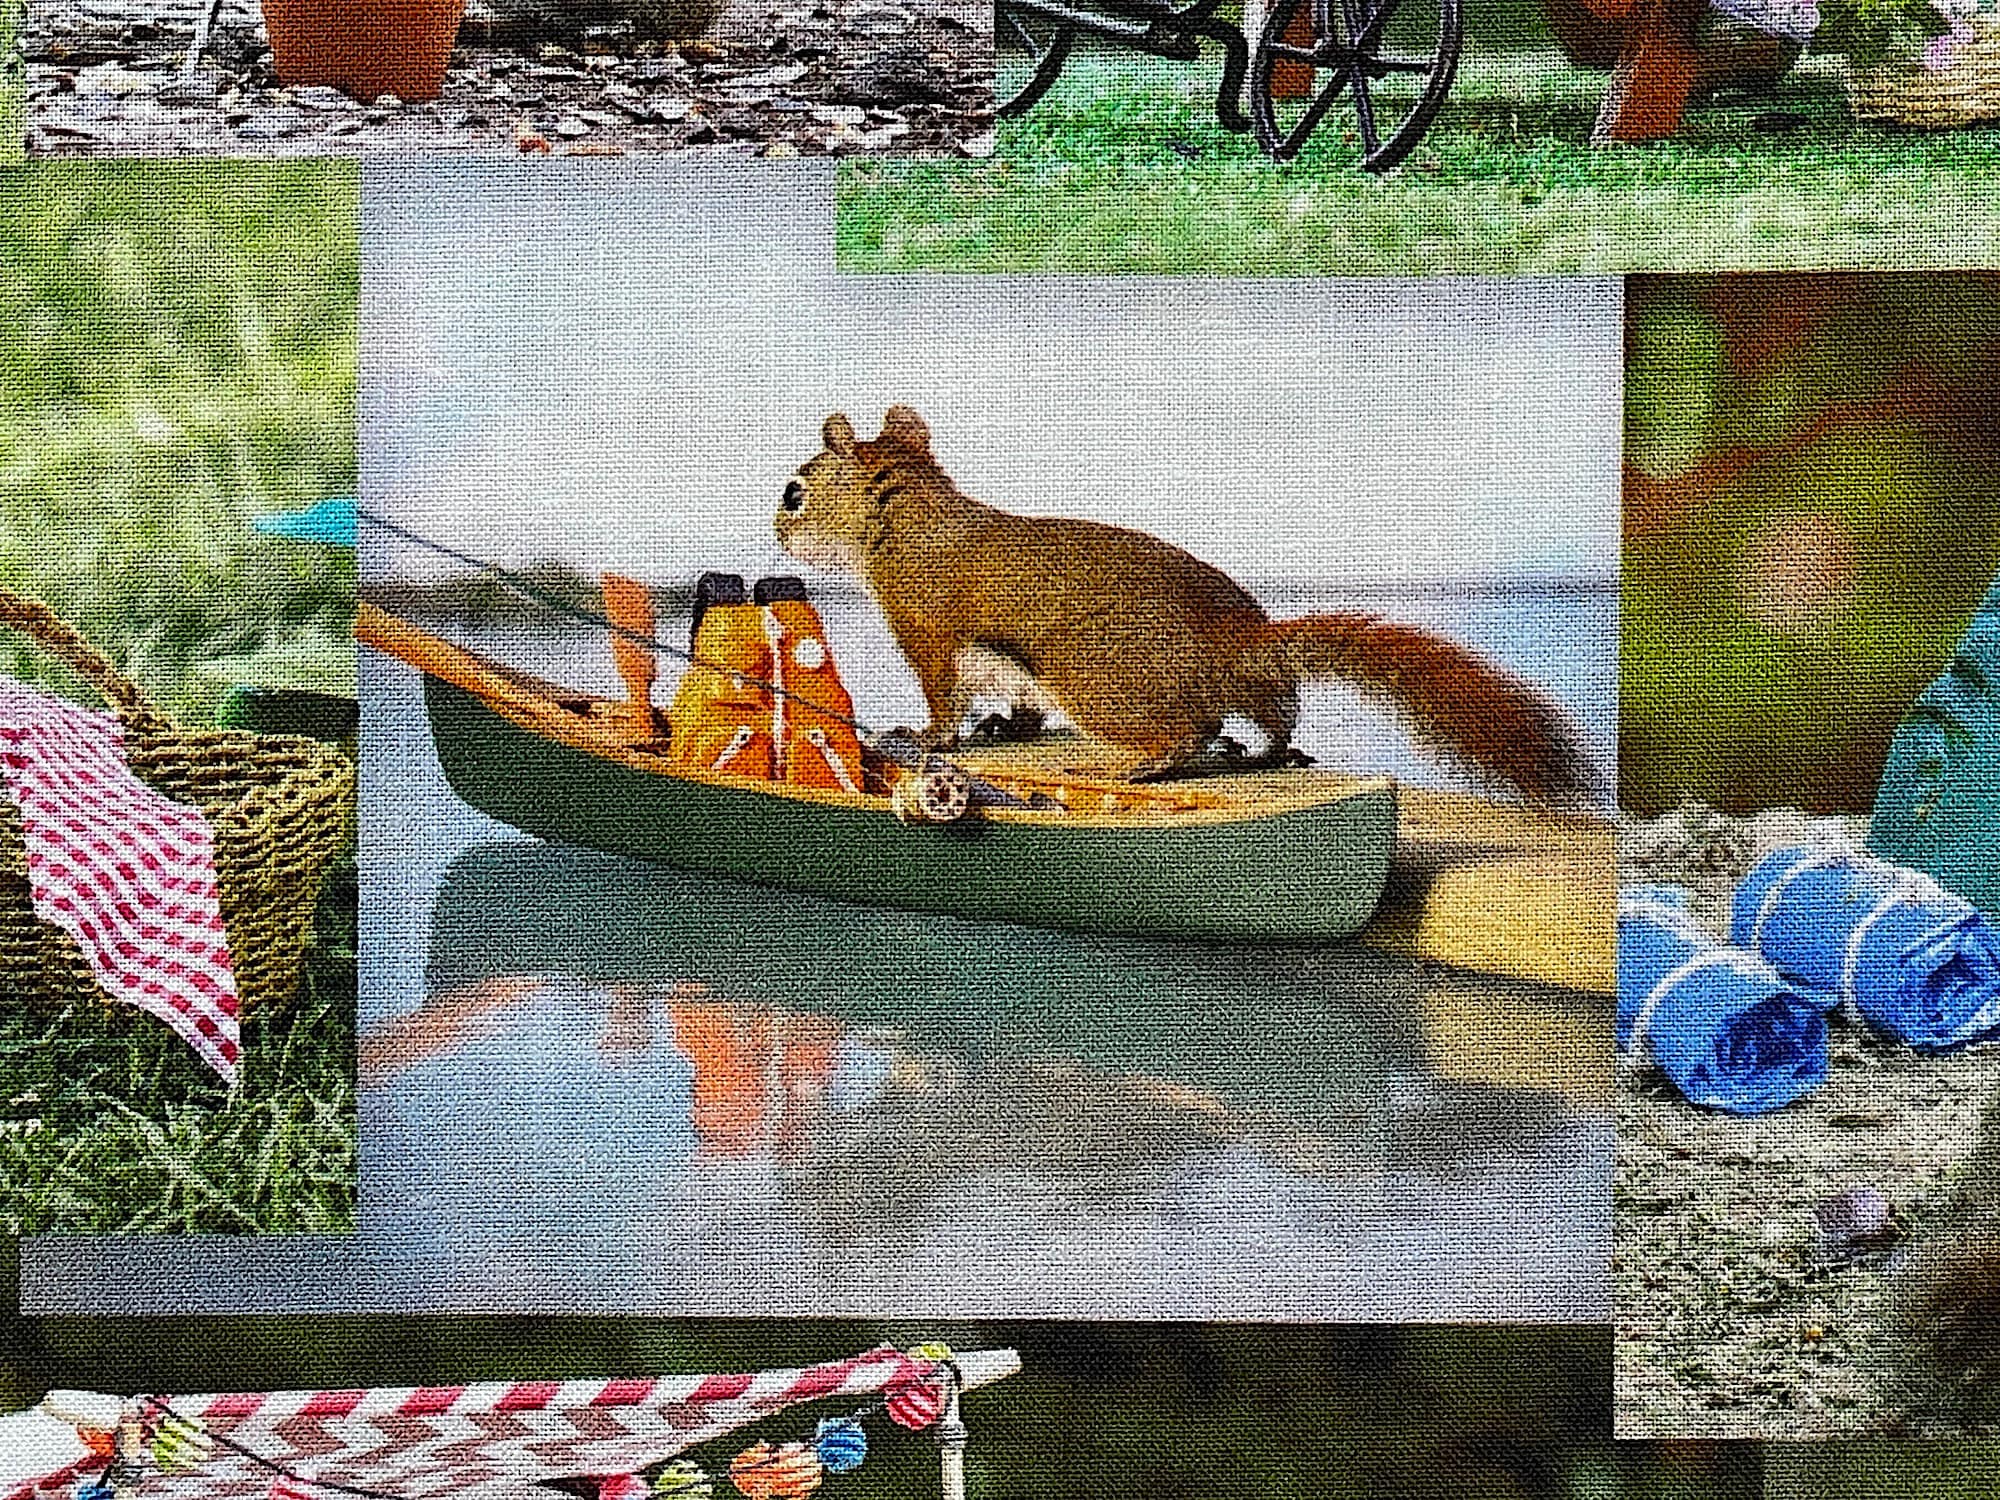 Close up of a squirrel by a canoe.